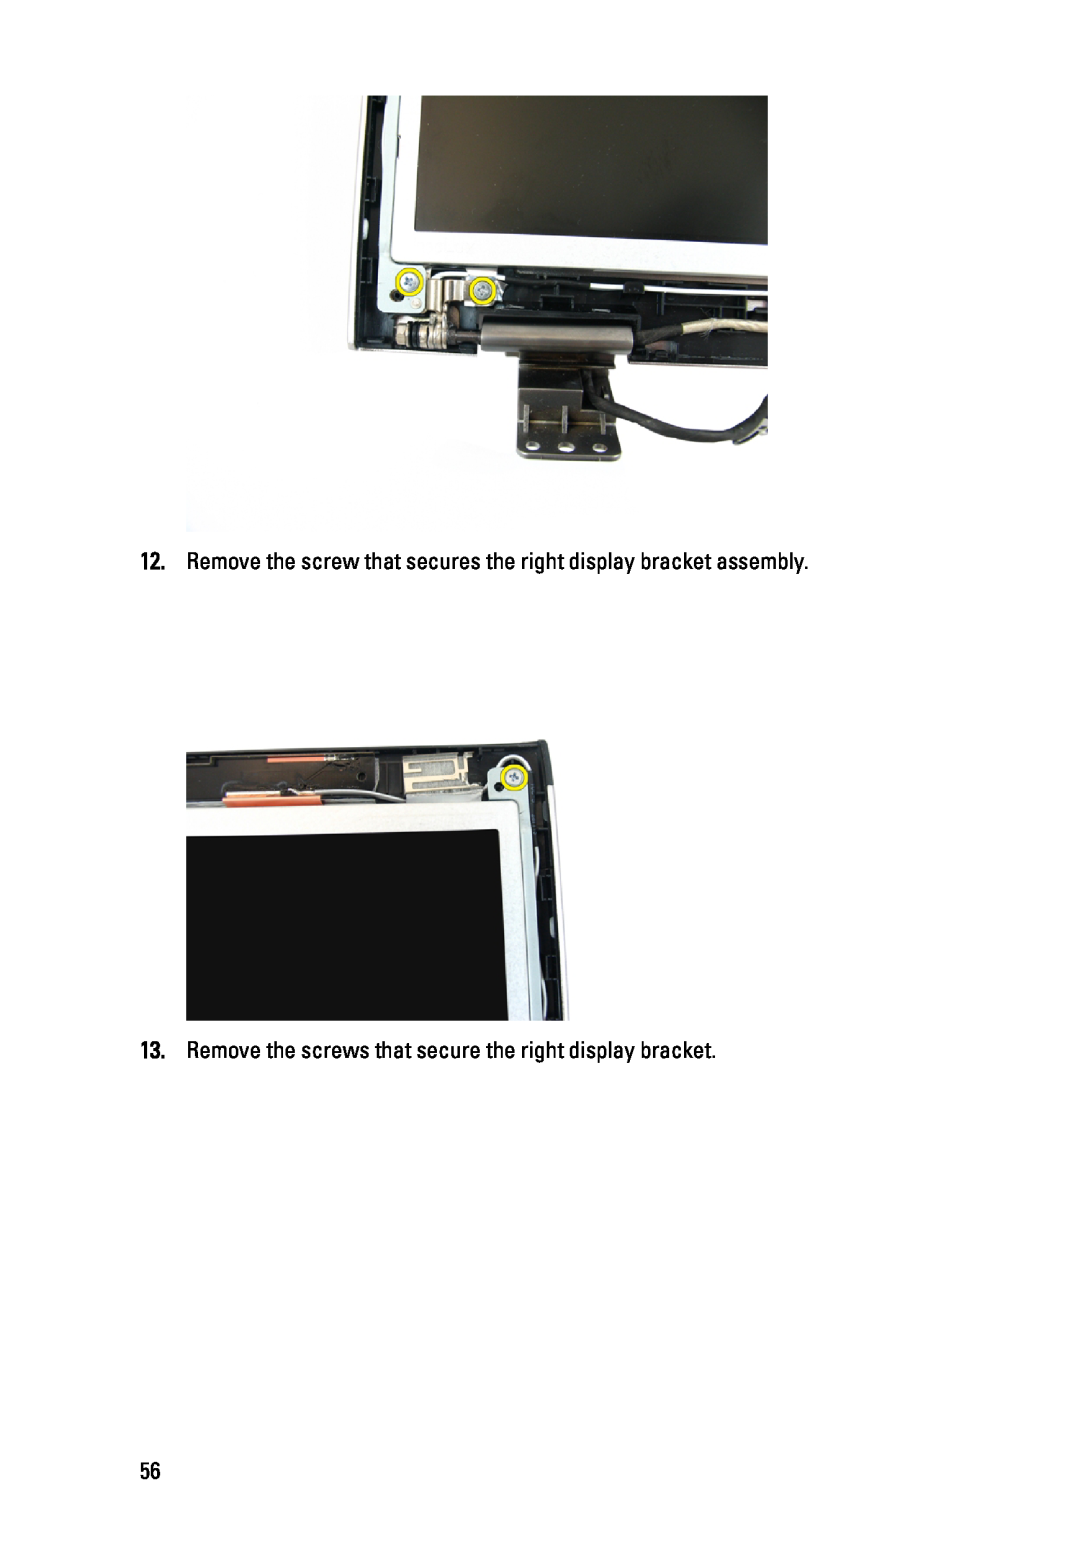 Dell 3450 owner manual Remove the screw that secures the right display bracket assembly 